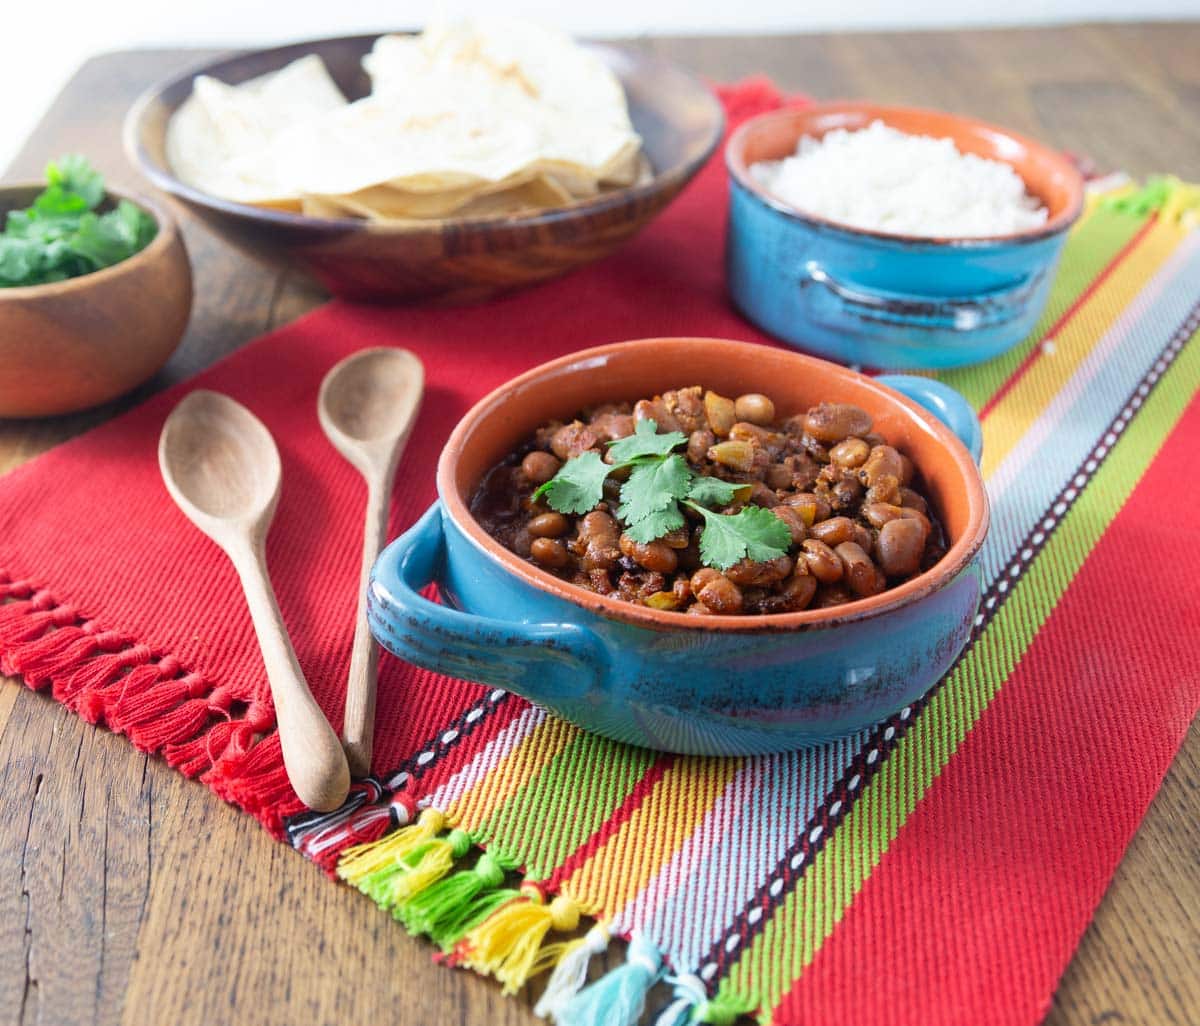 A photo of frijoles charros with cilantro, rice and tortillas in the background.